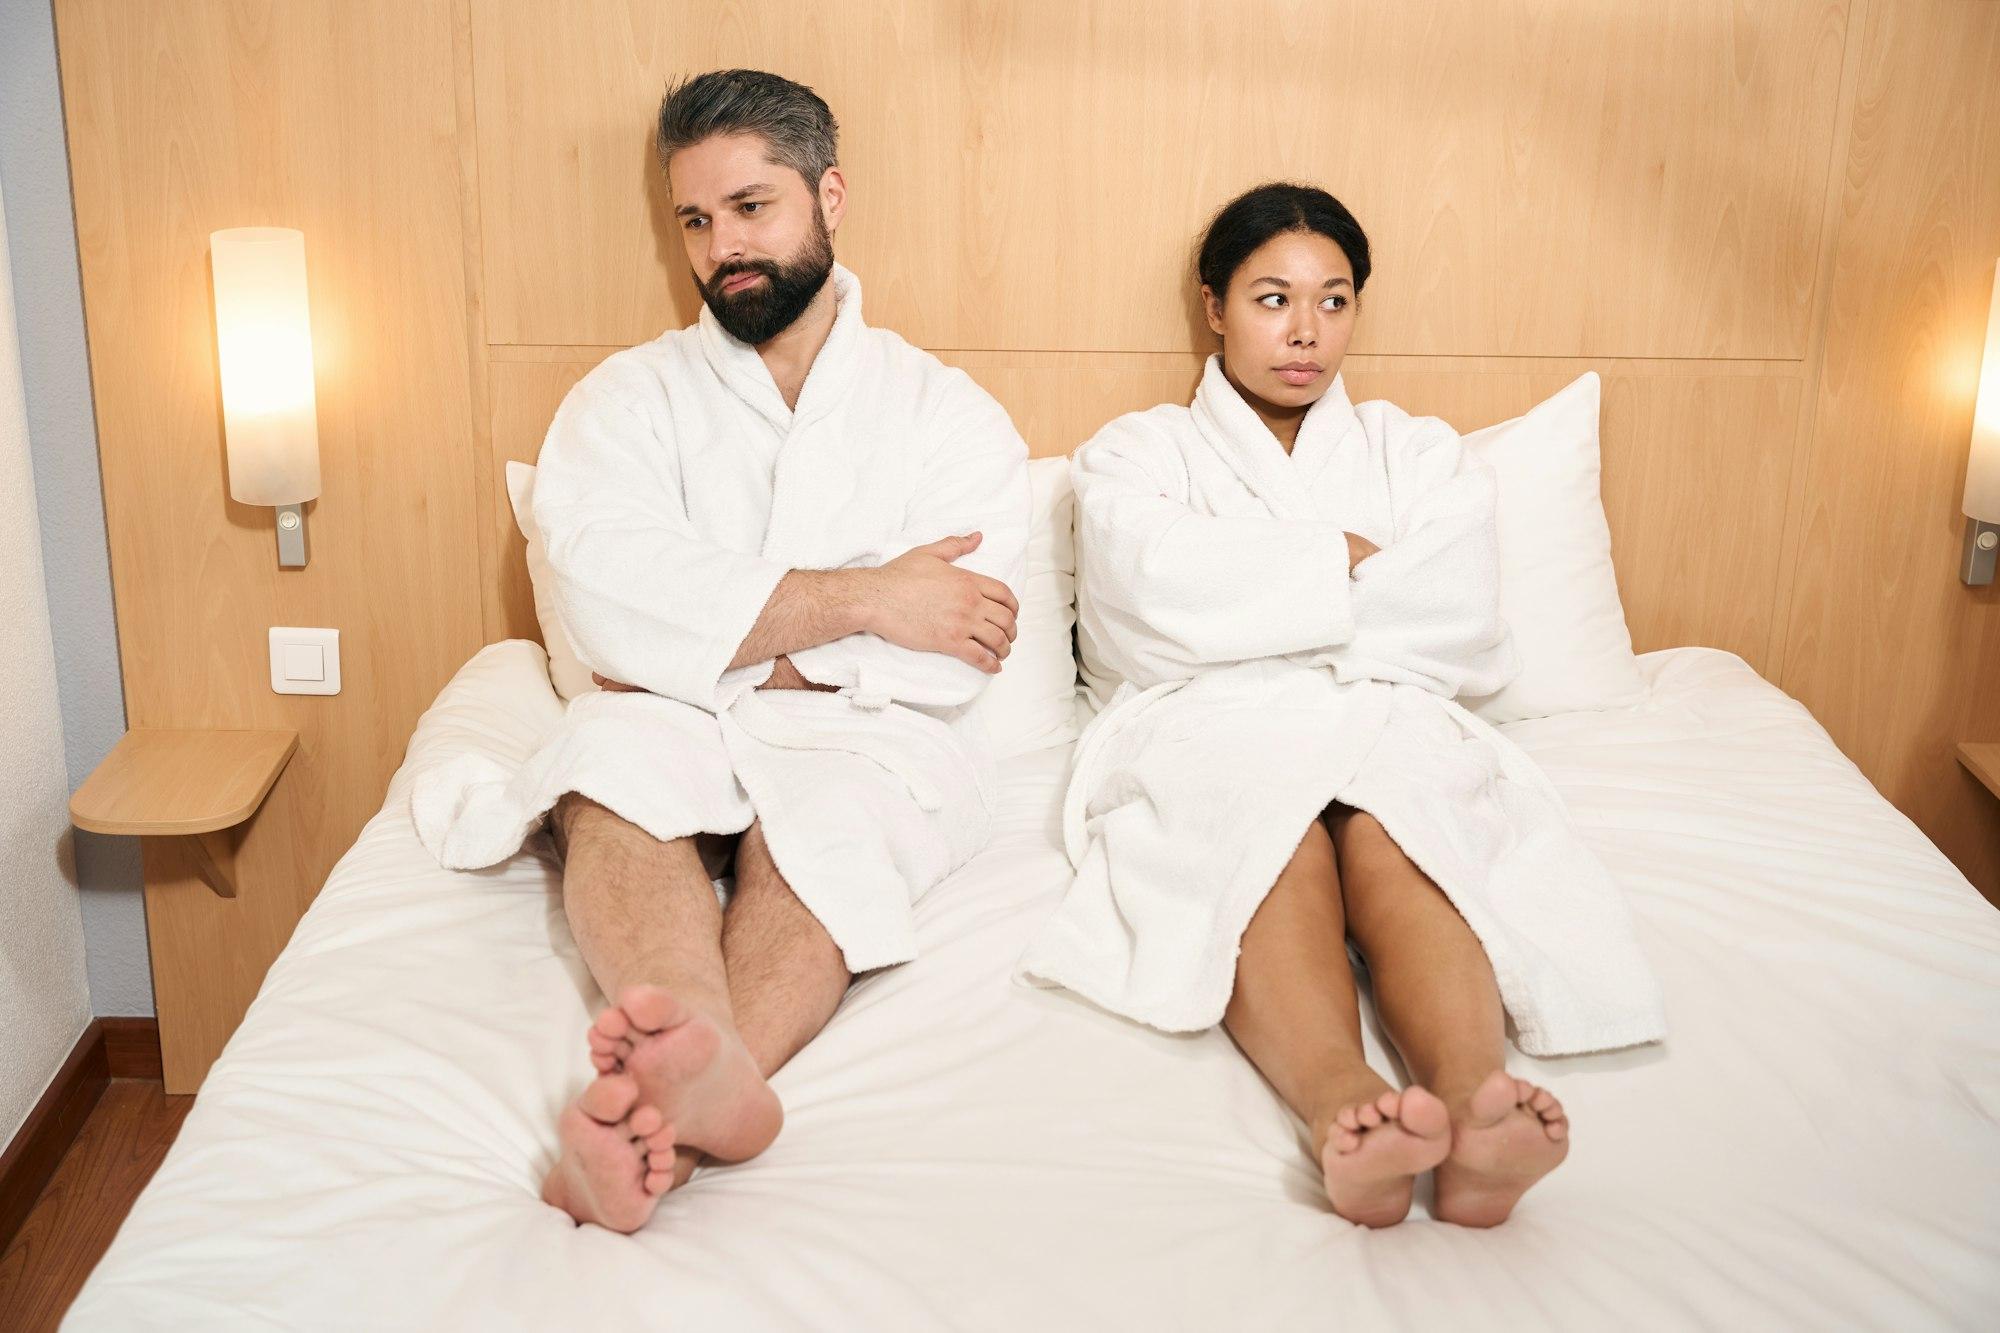 Sad couple in bathrobes sitting in silence in hotel room